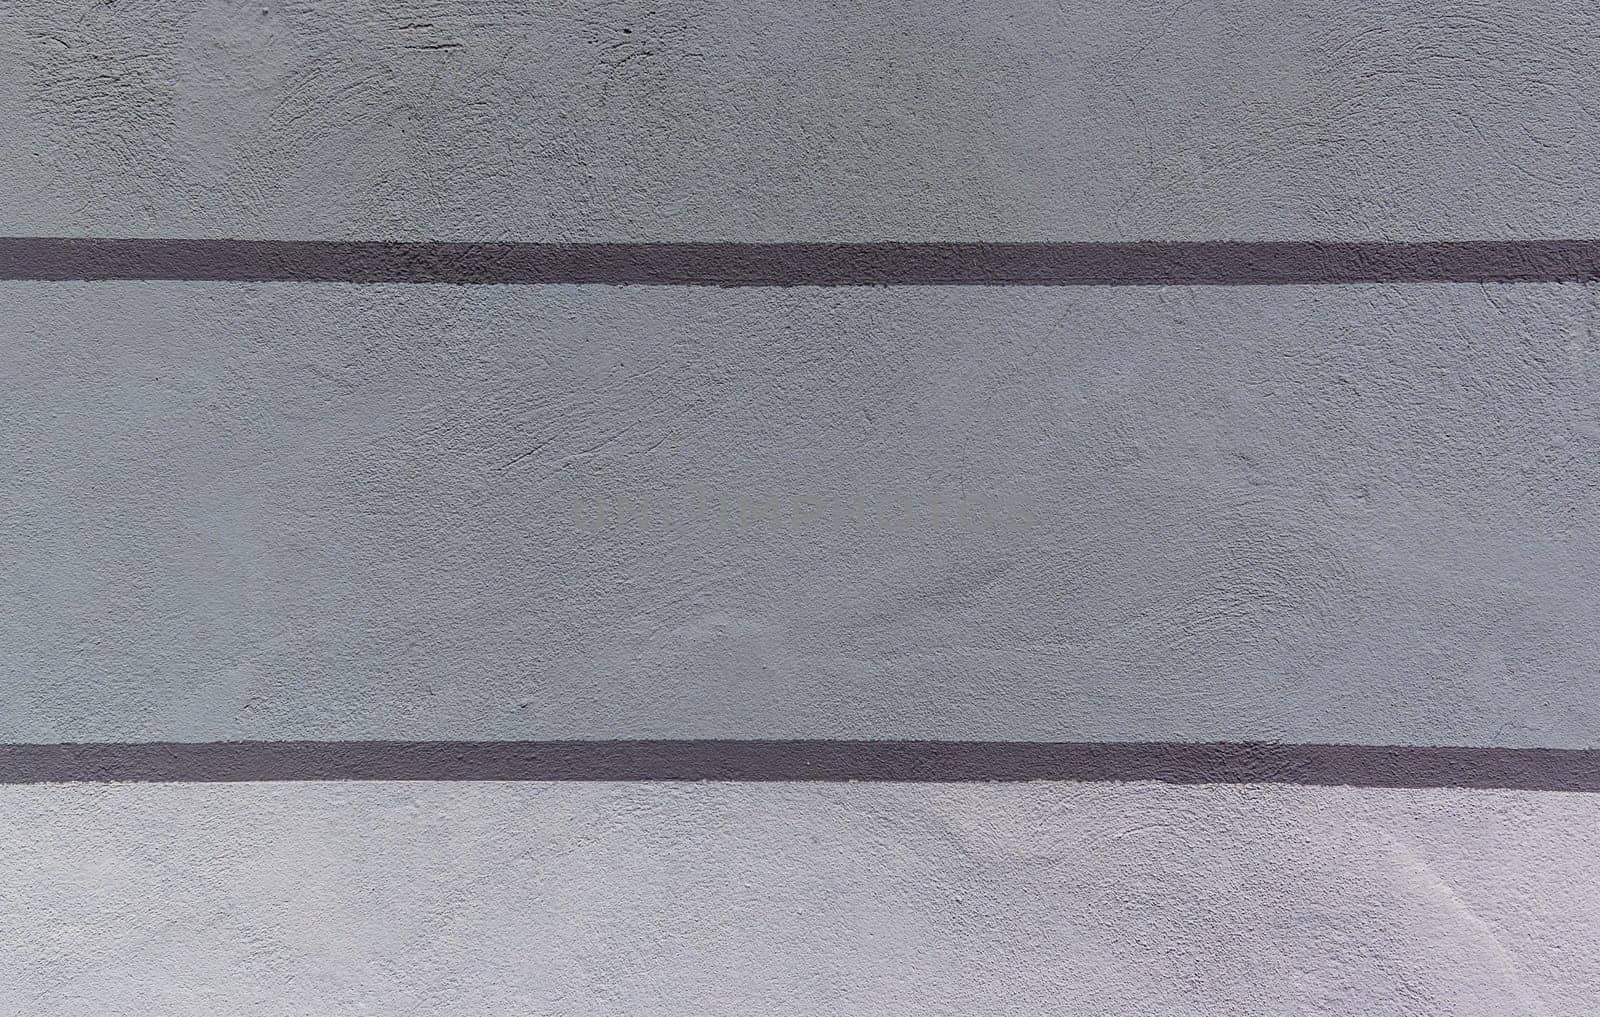 striped wall painted gray as texture and background by Mixa74